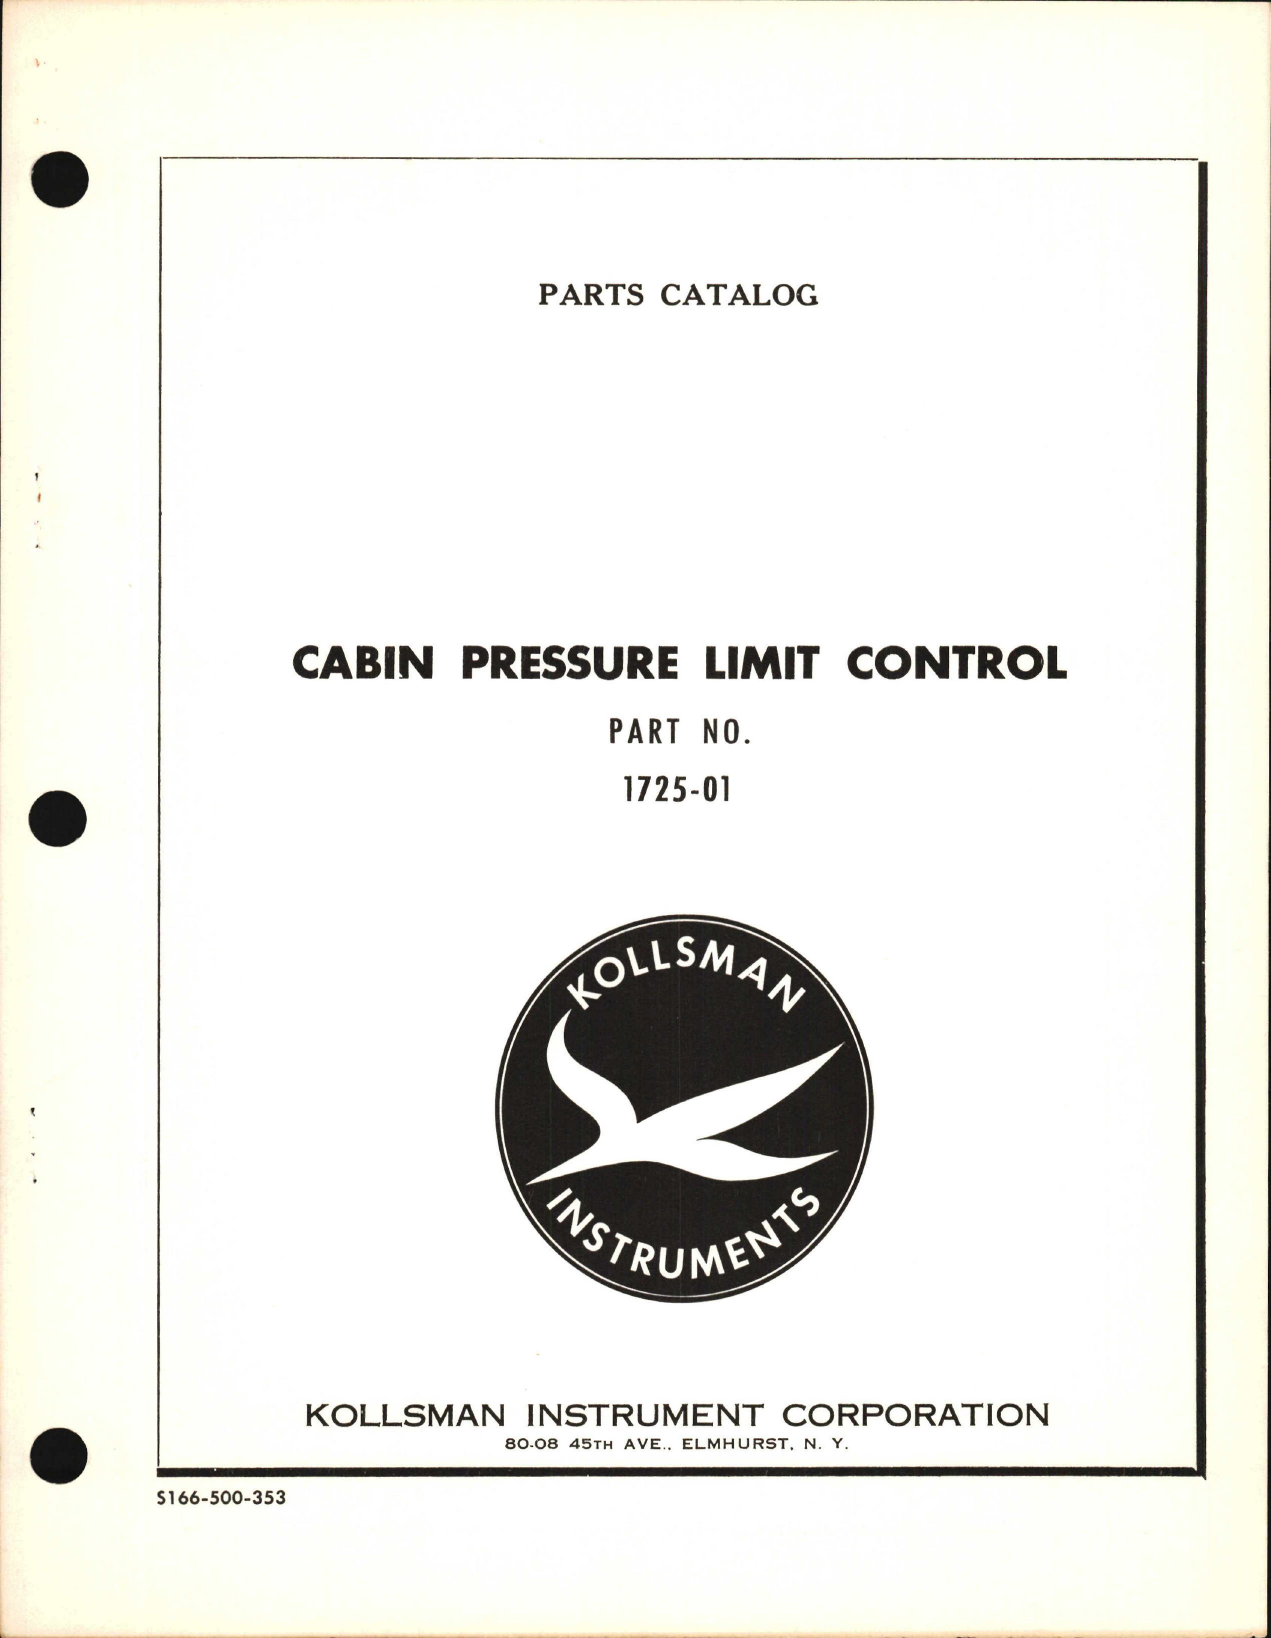 Sample page 1 from AirCorps Library document: Parts Catalog for Kollsman Cabin Pressure Limit Control 1725-01